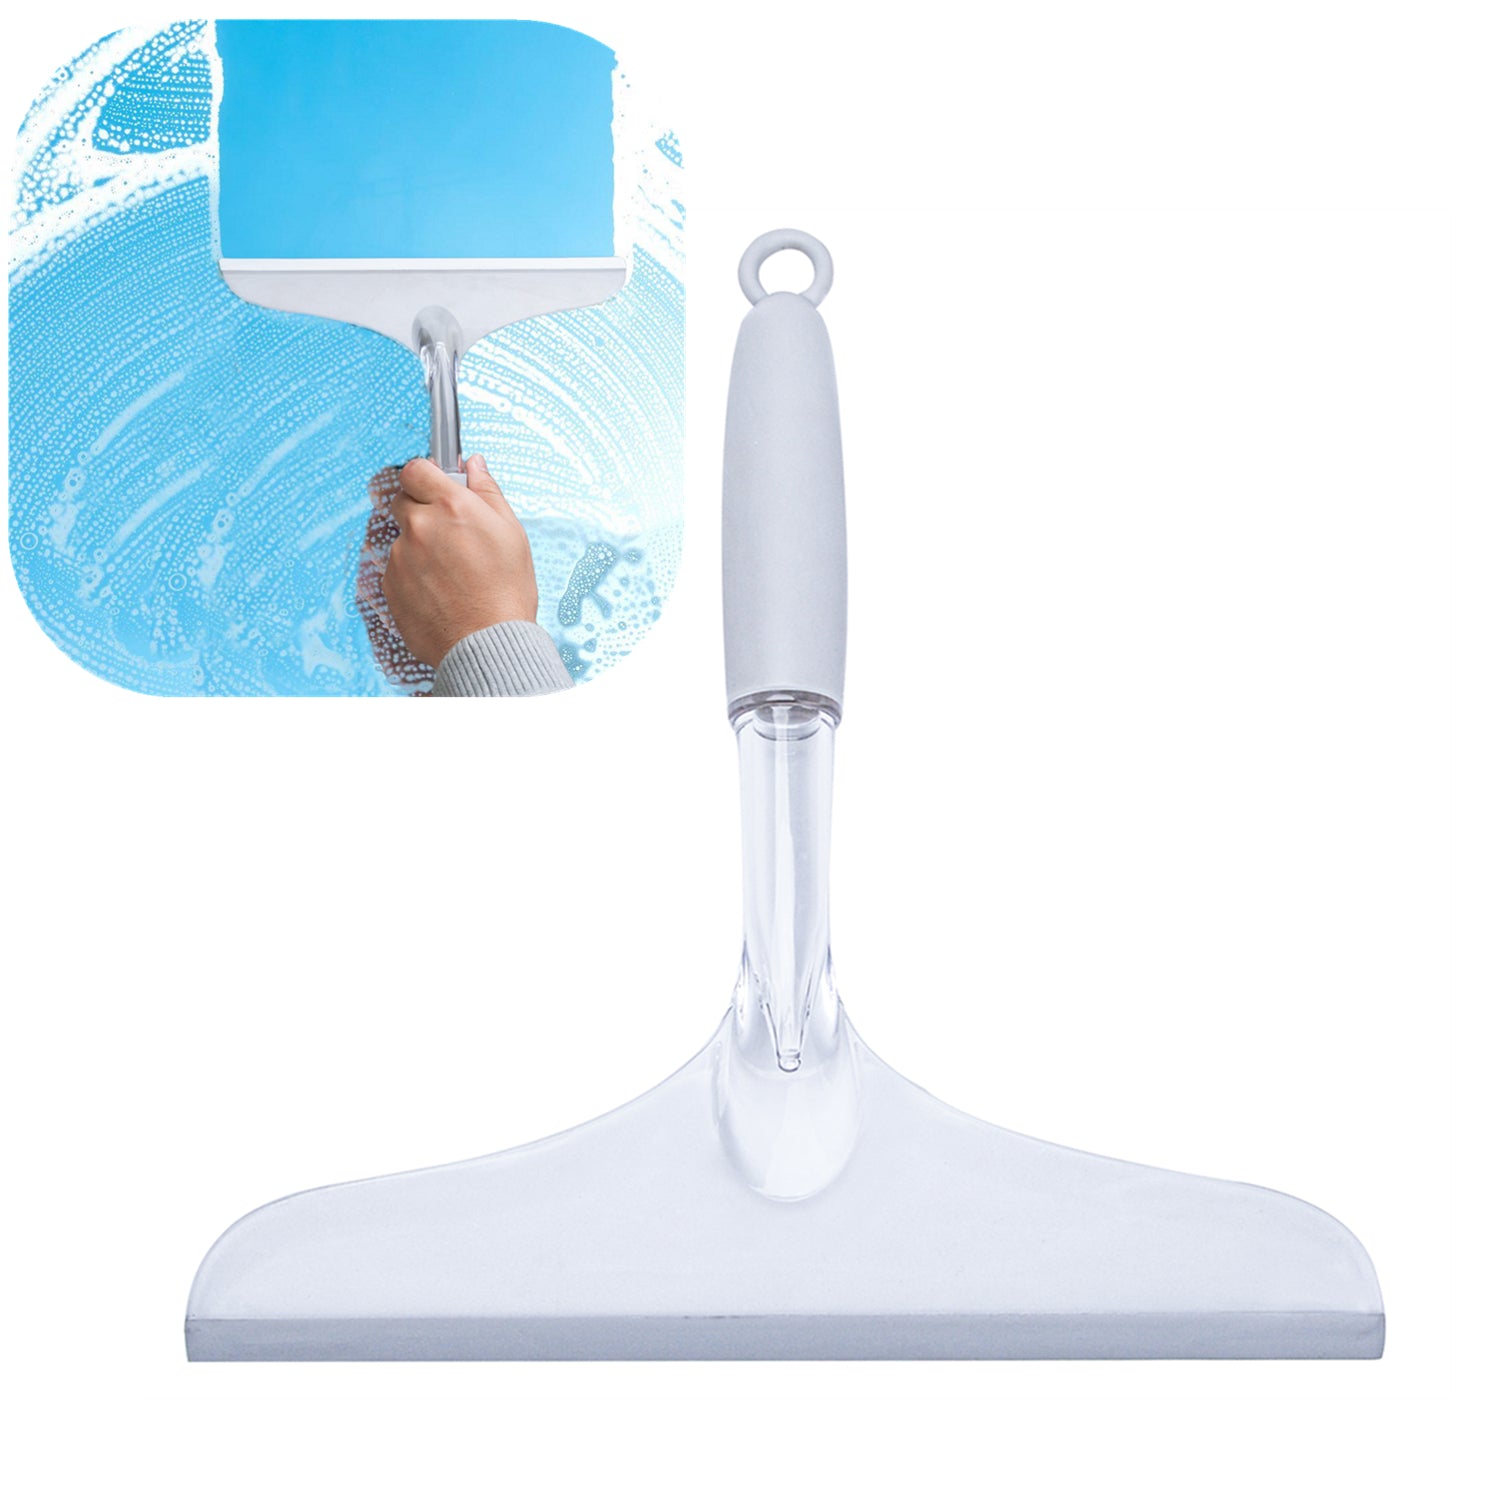 Pompotops Shower Squeegee for Shower Glass Door Bathroom Tile and Mirror, Window Squeegees Streak-Free Rubber Squeegee Wiper Cleaning Tools, Coffee